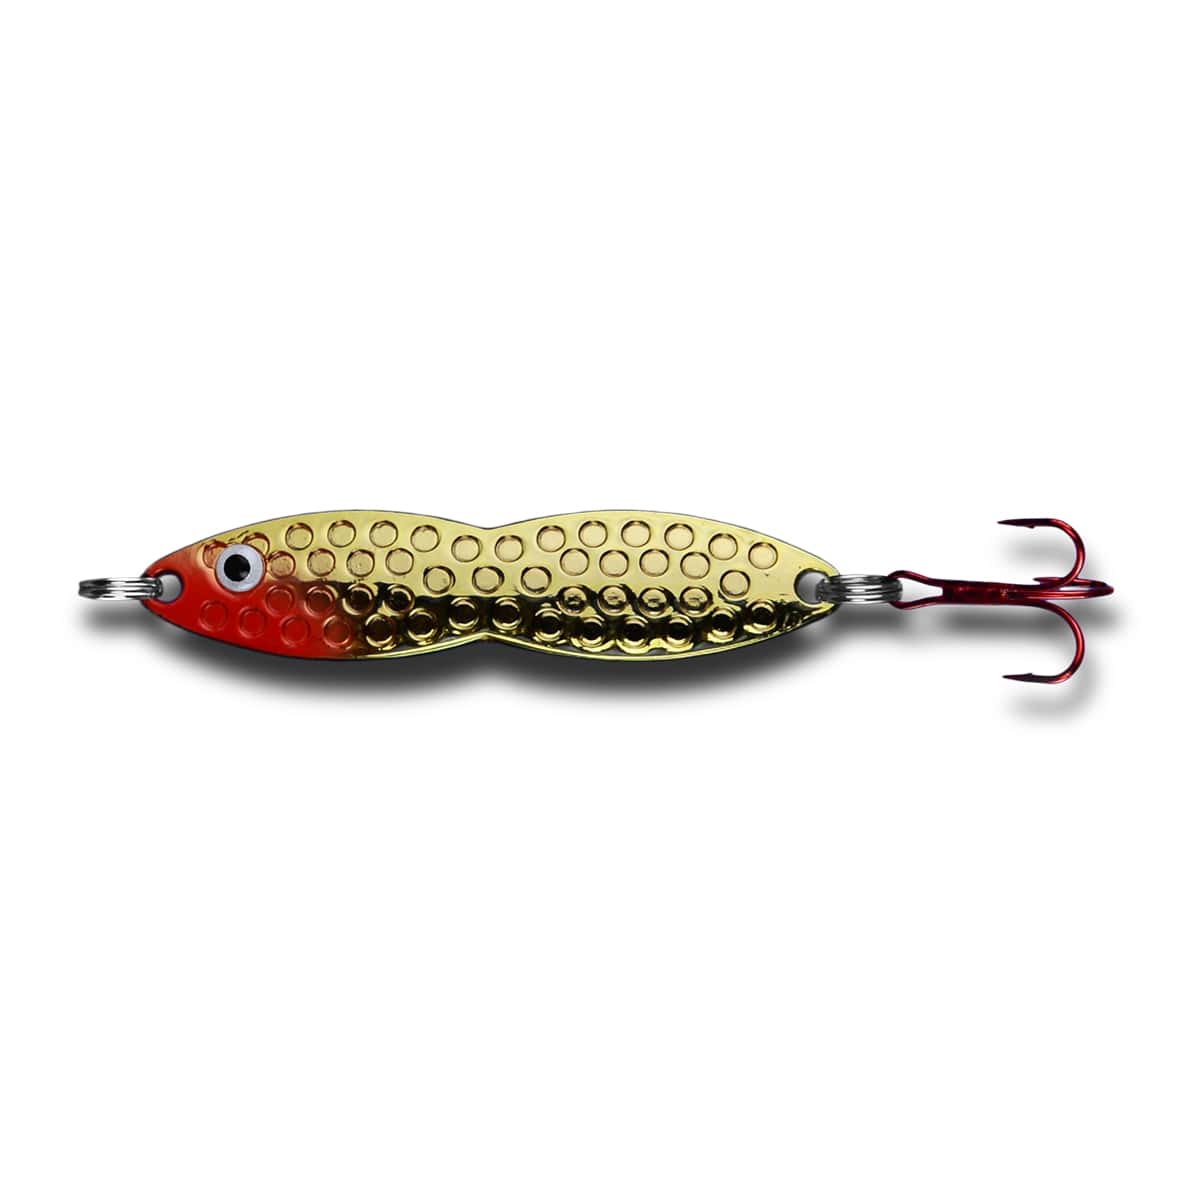 Pk Lures Flutterfish Spoon: Gold Plate; 1/4 oz.